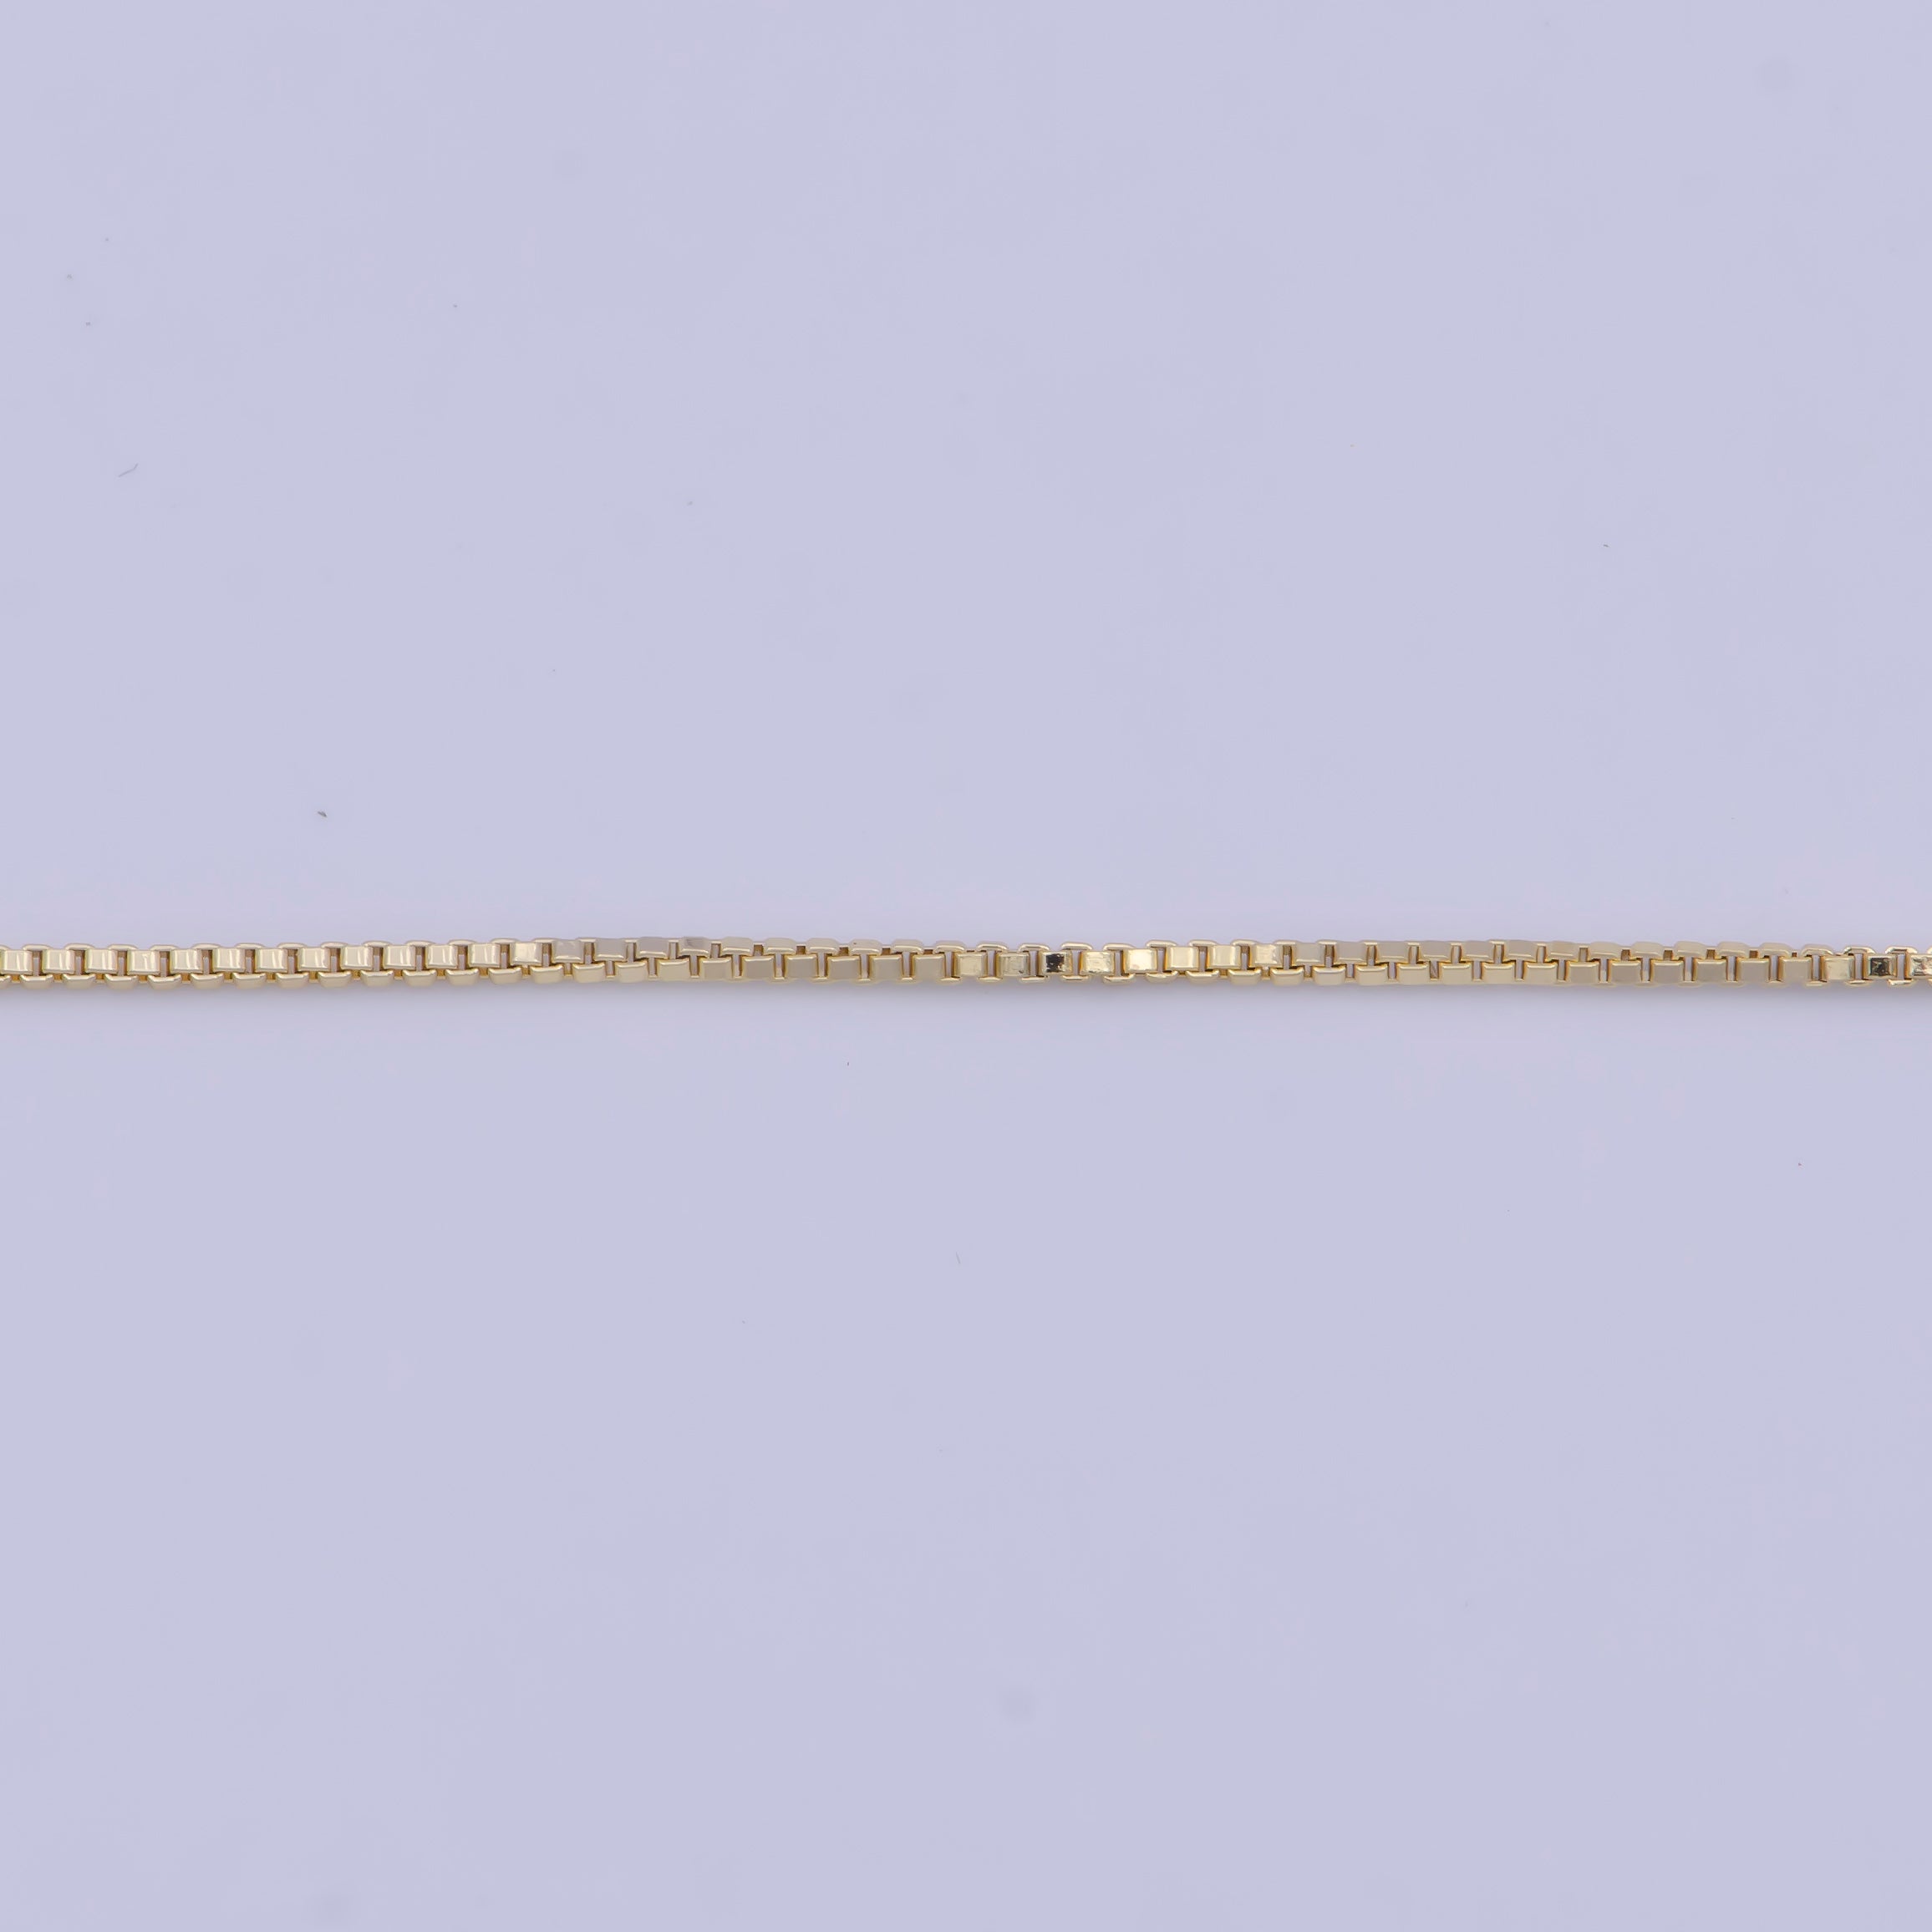 14K Gold Filled Box Chain Minimalist Necklace Fine Chain Necklace 19 inch Length, 0.6mm Width Ready to Wear WA-1113 - DLUXCA